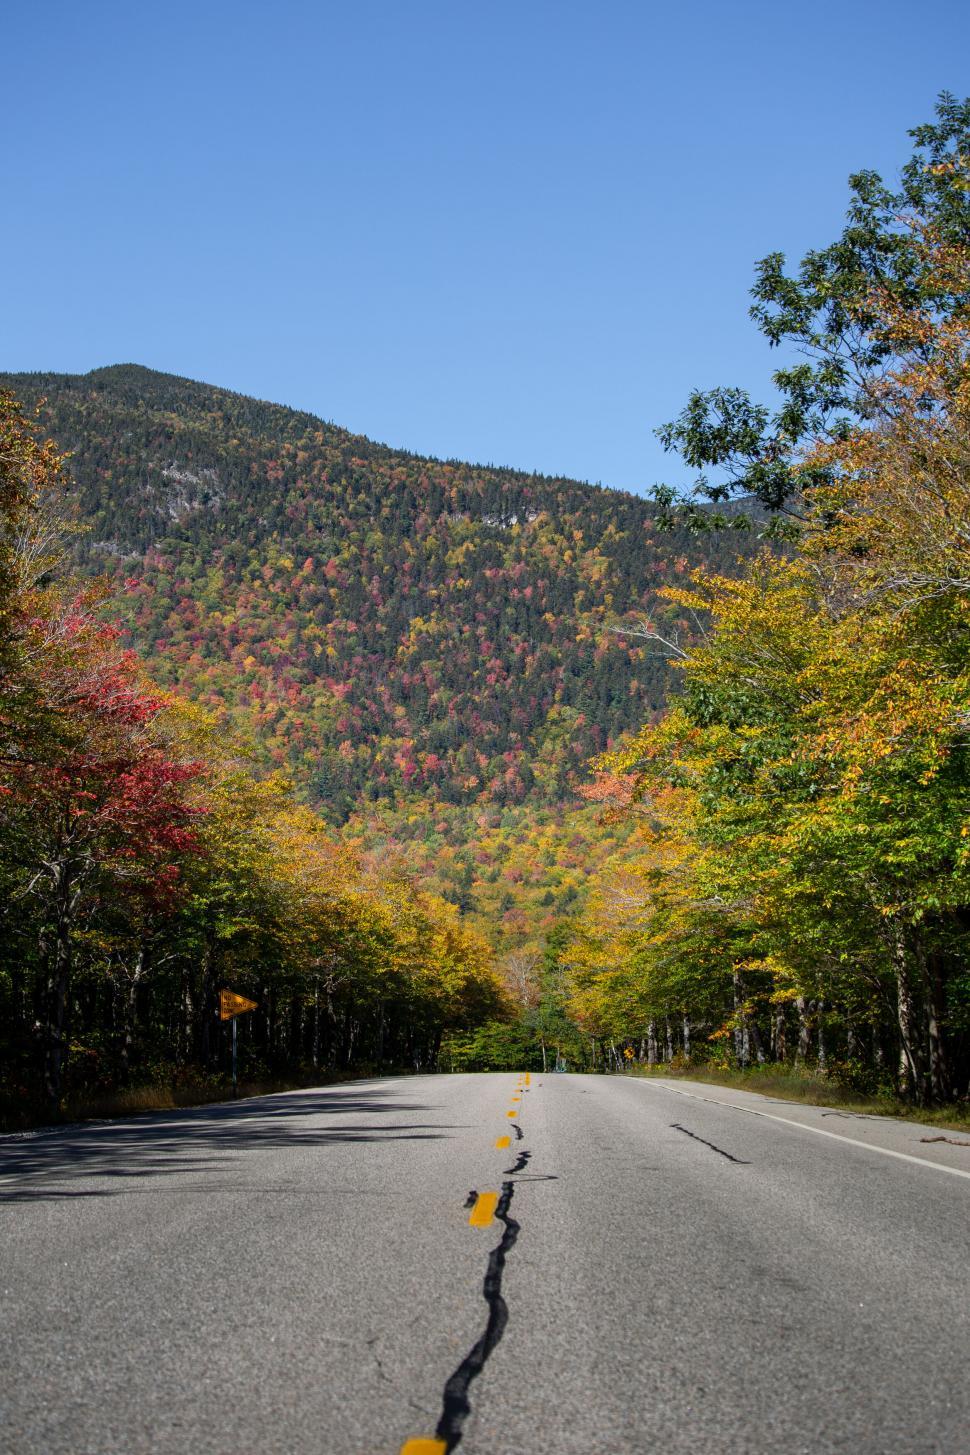 Free Image of Scenic mountain road in autumn 